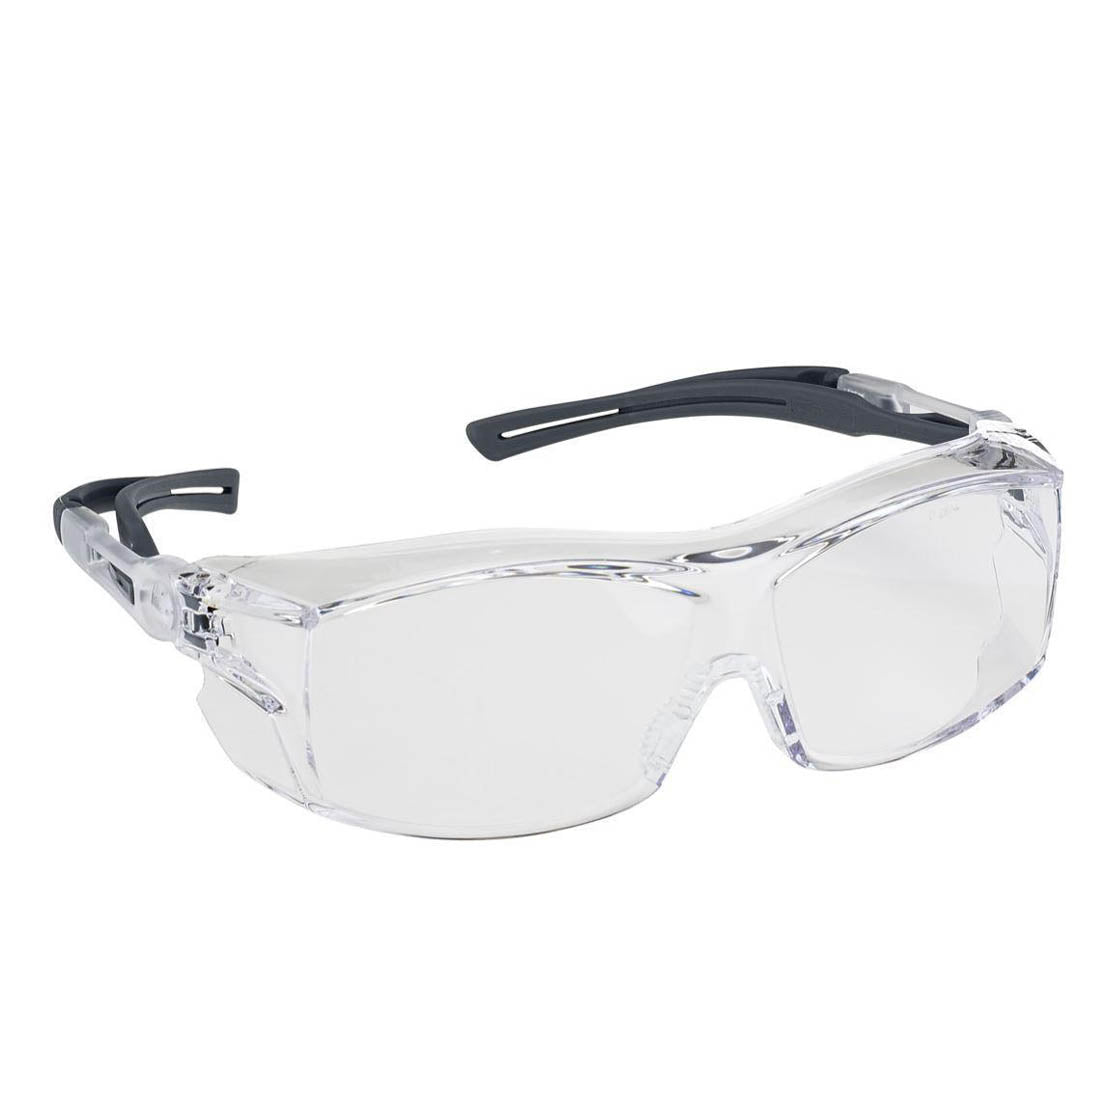 Safety Glasses EZ-ON, Adjustable Clear Lens 4A, Anti-Fog, Anti-Scratch, Anti-Static